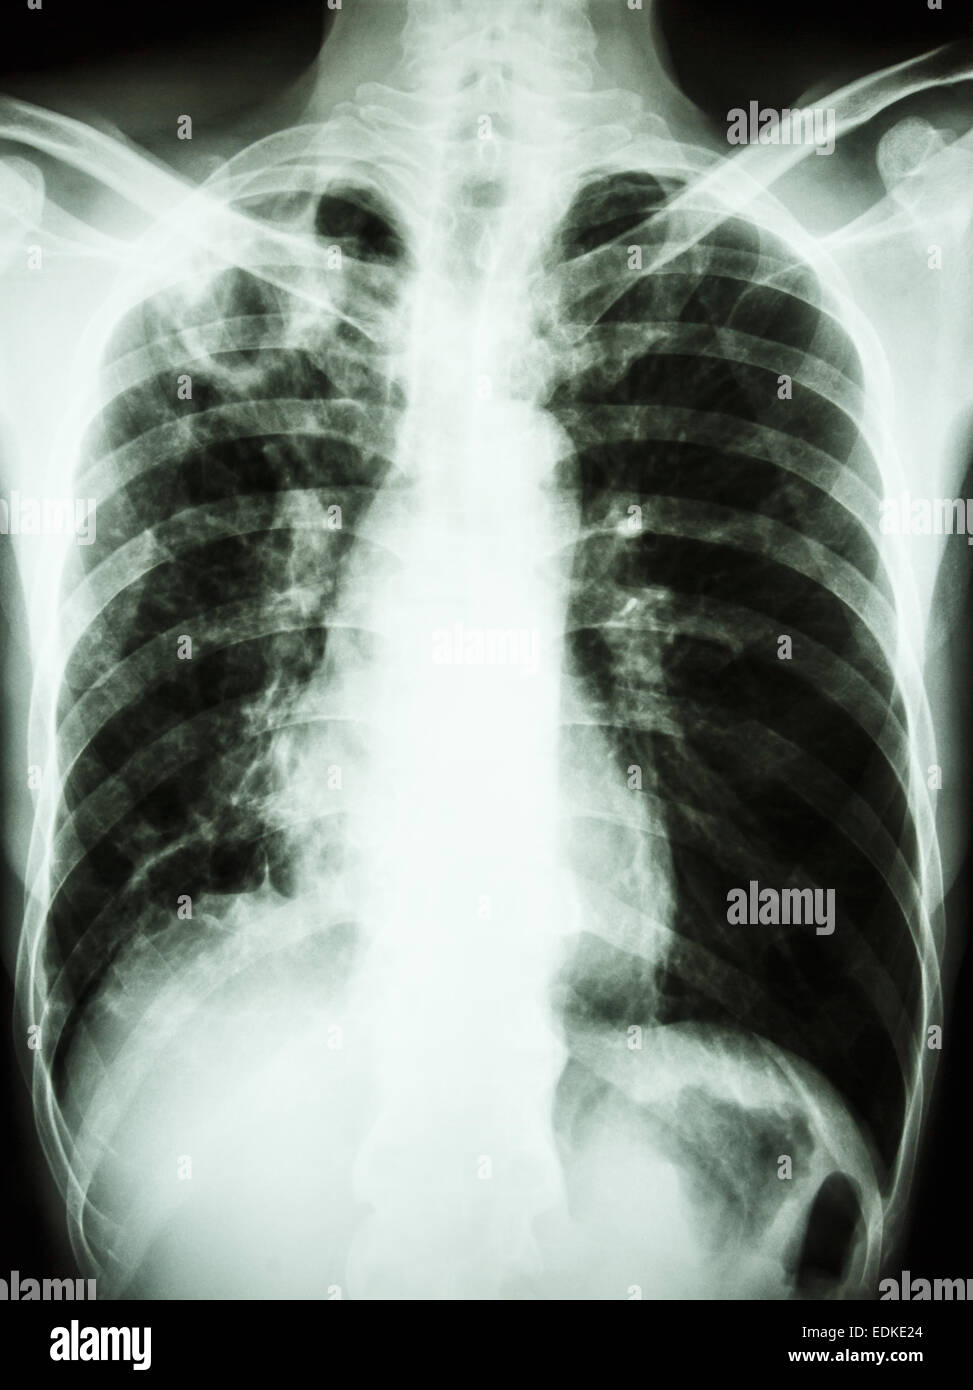 film chest x-ray show cavity at right upper lung due to Mycobacterium tuberculosis infection (Pulmonary Tuberculosis) Stock Photo